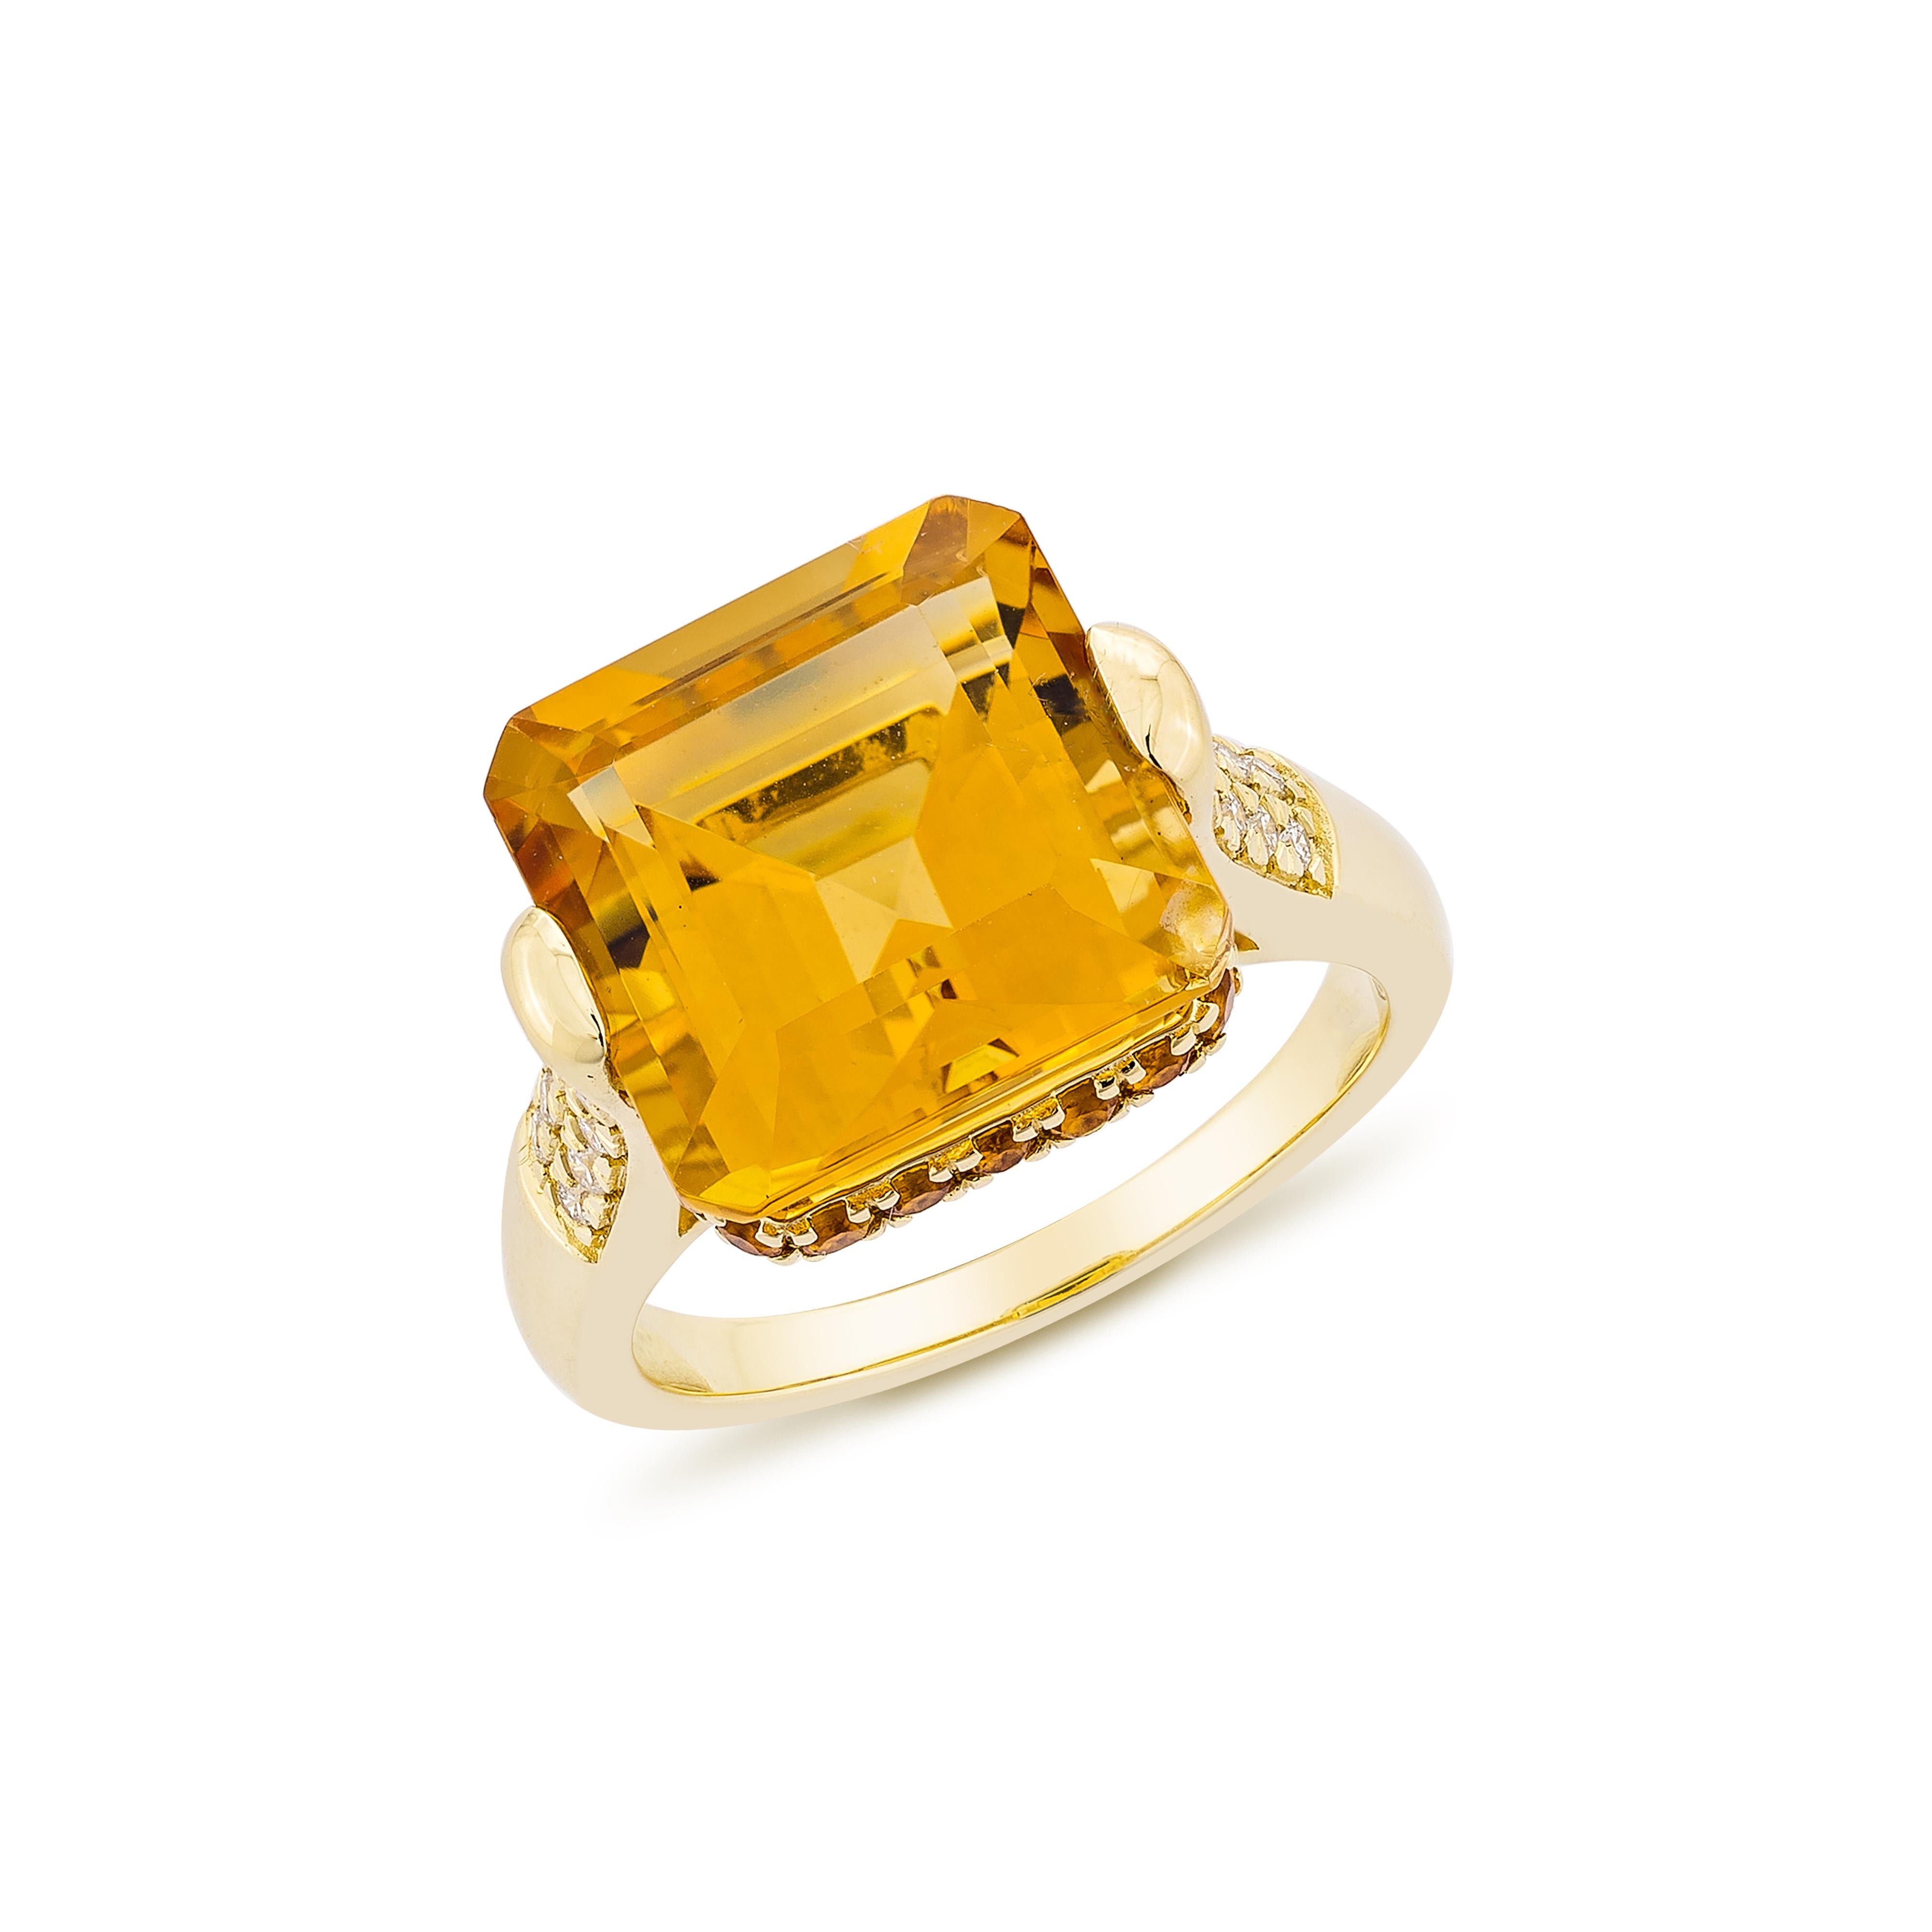 Contemporary 7.92 Carat Citrine Fancy Ring in 18Karat Yellow Gold with White Diamond.   For Sale